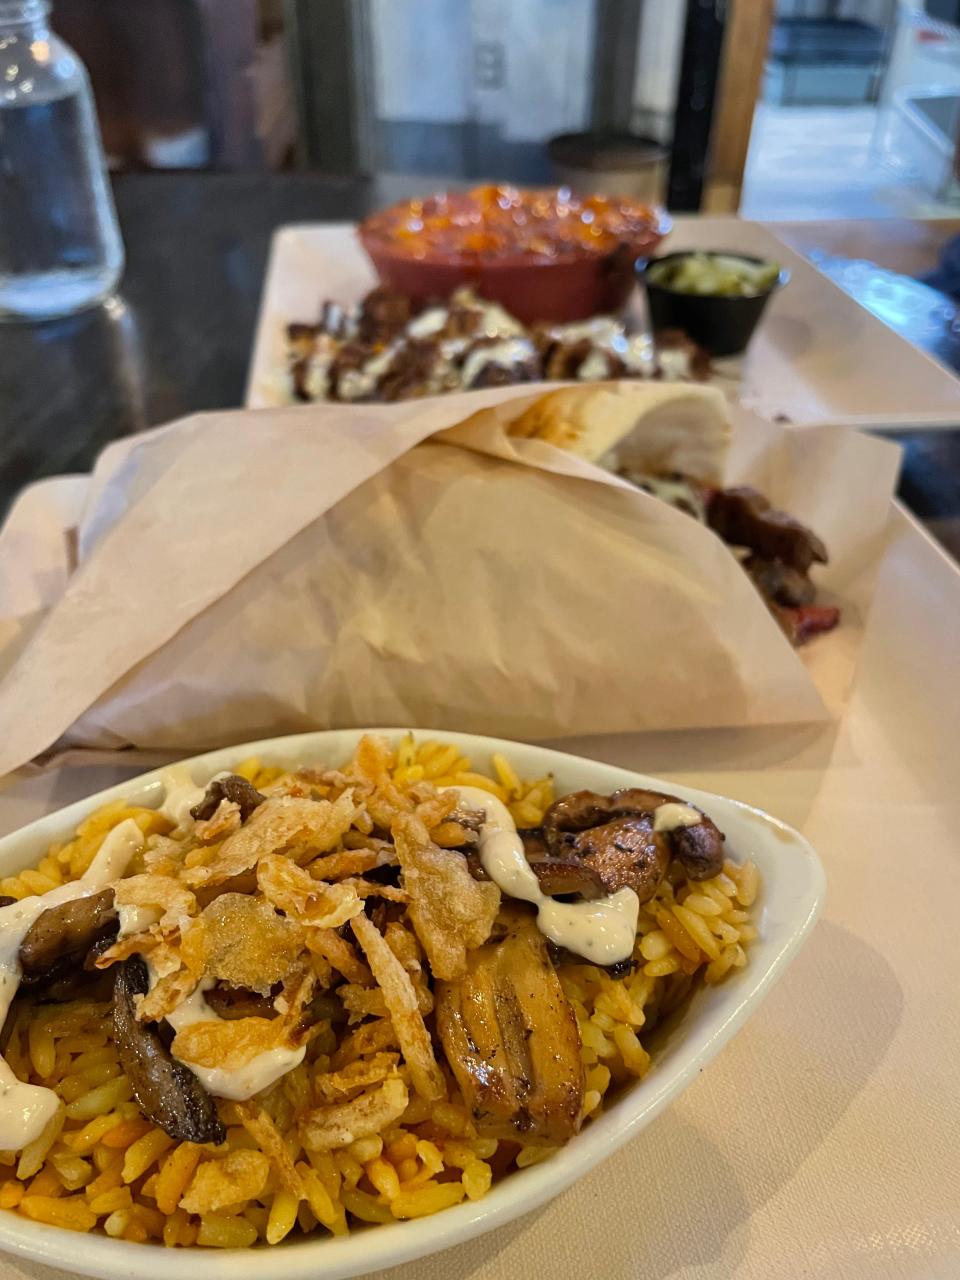 Alé Rae’s Gastropub serves pub-style comfort foods with a chef’s touch. Pictured, from front to back: mushroom-butter rice pilaf, Gordo Steak & Cheese roll, pulled pork plate with a side of macaroni and cheese.